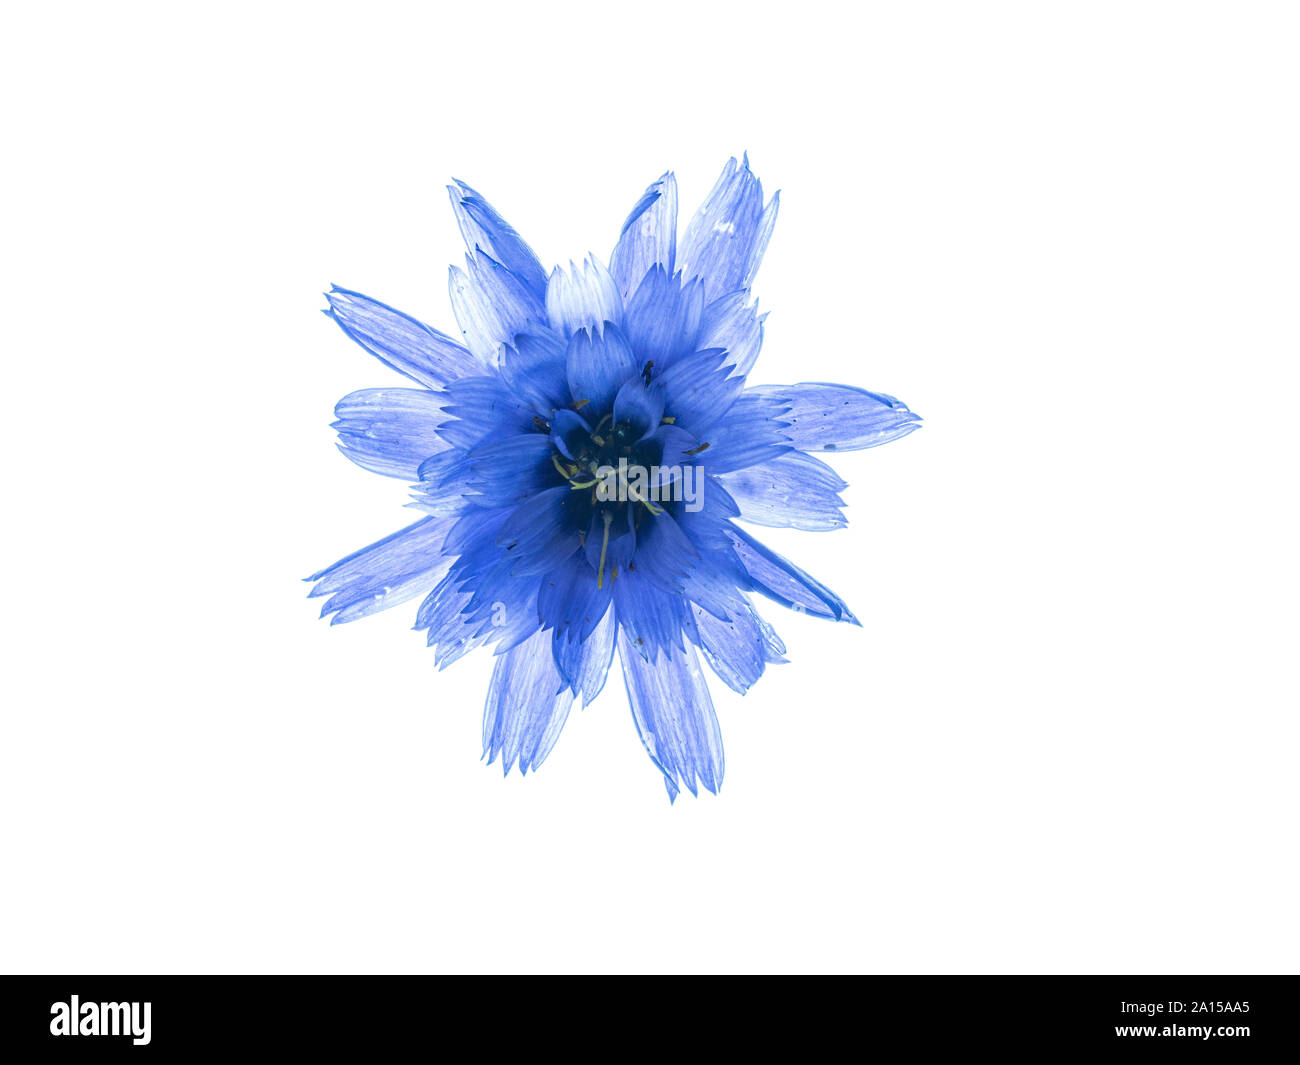 A single blue cornflower backlit against a white background Stock Photo